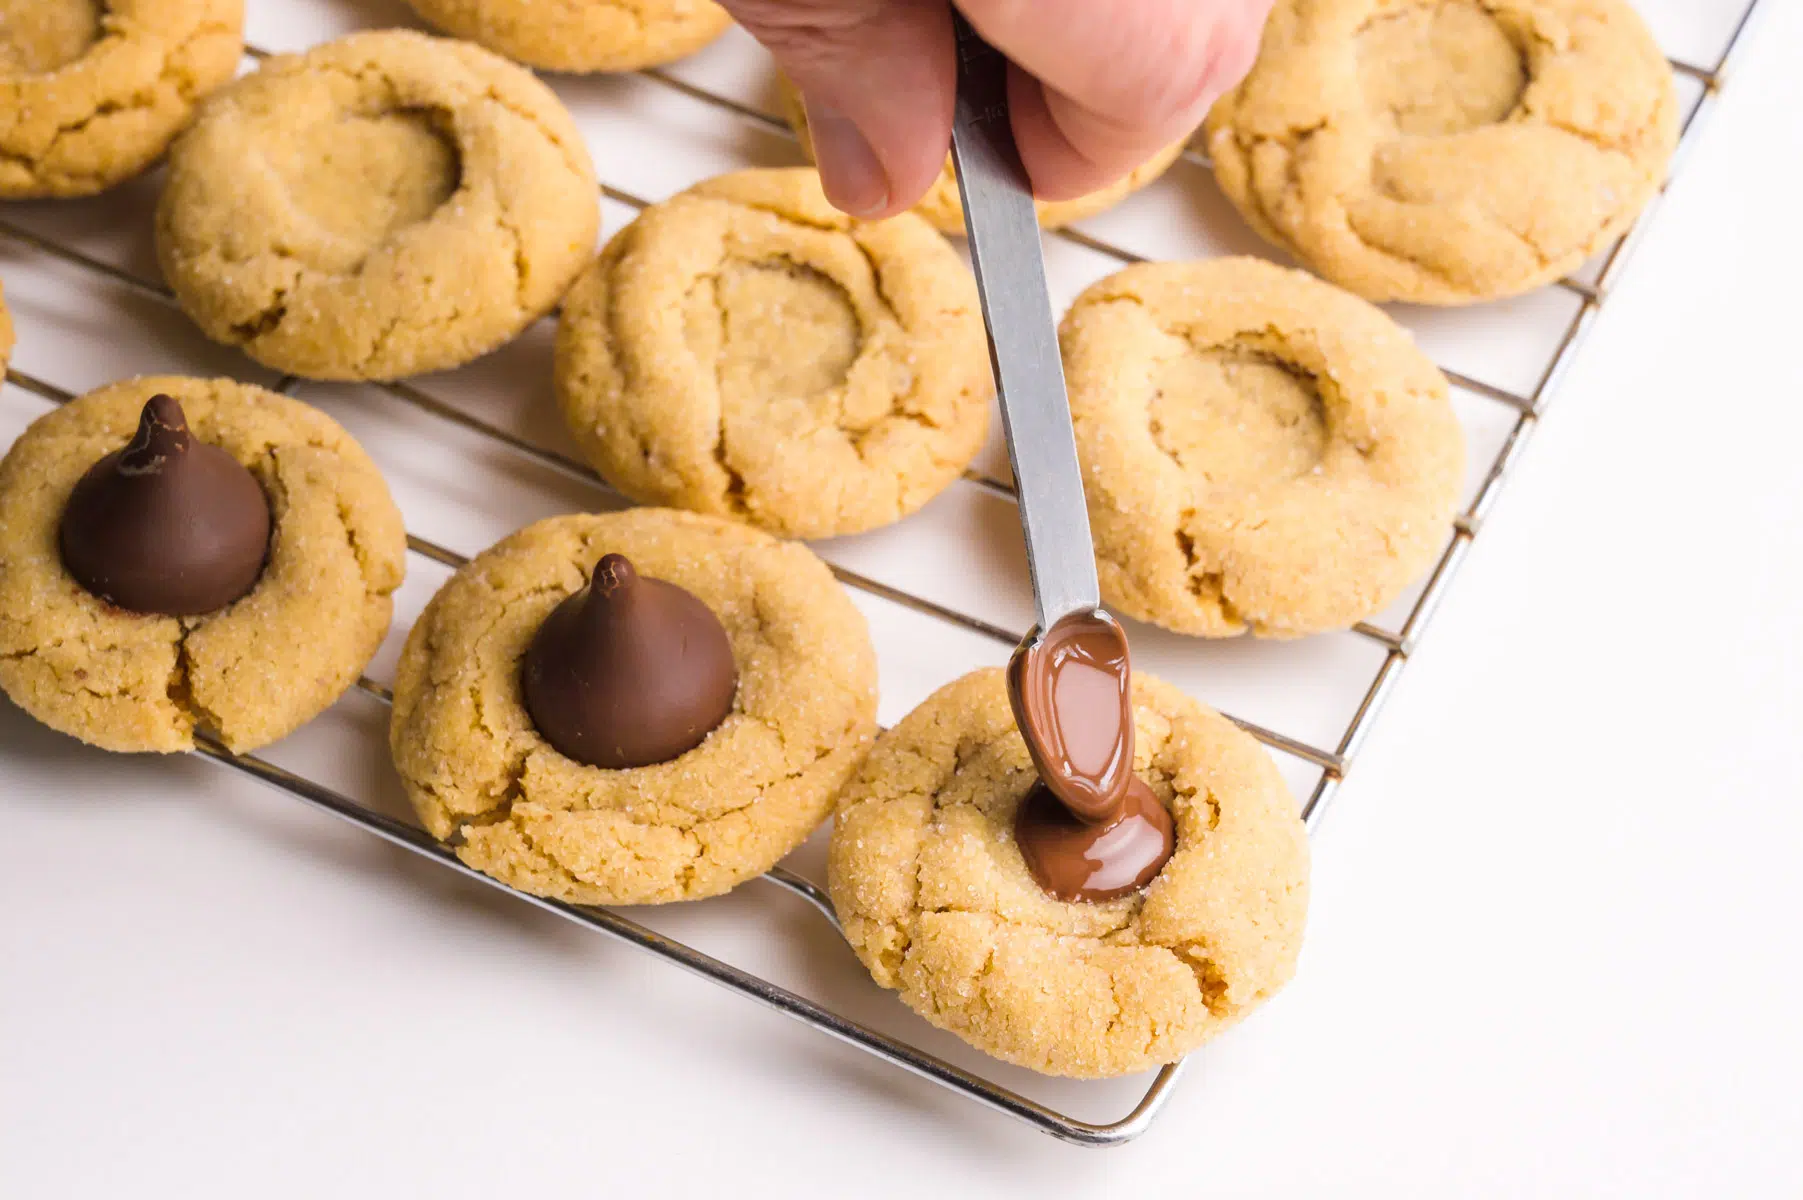 Melted chocolate is being poured into a divot in the center of peanut butter cookies.